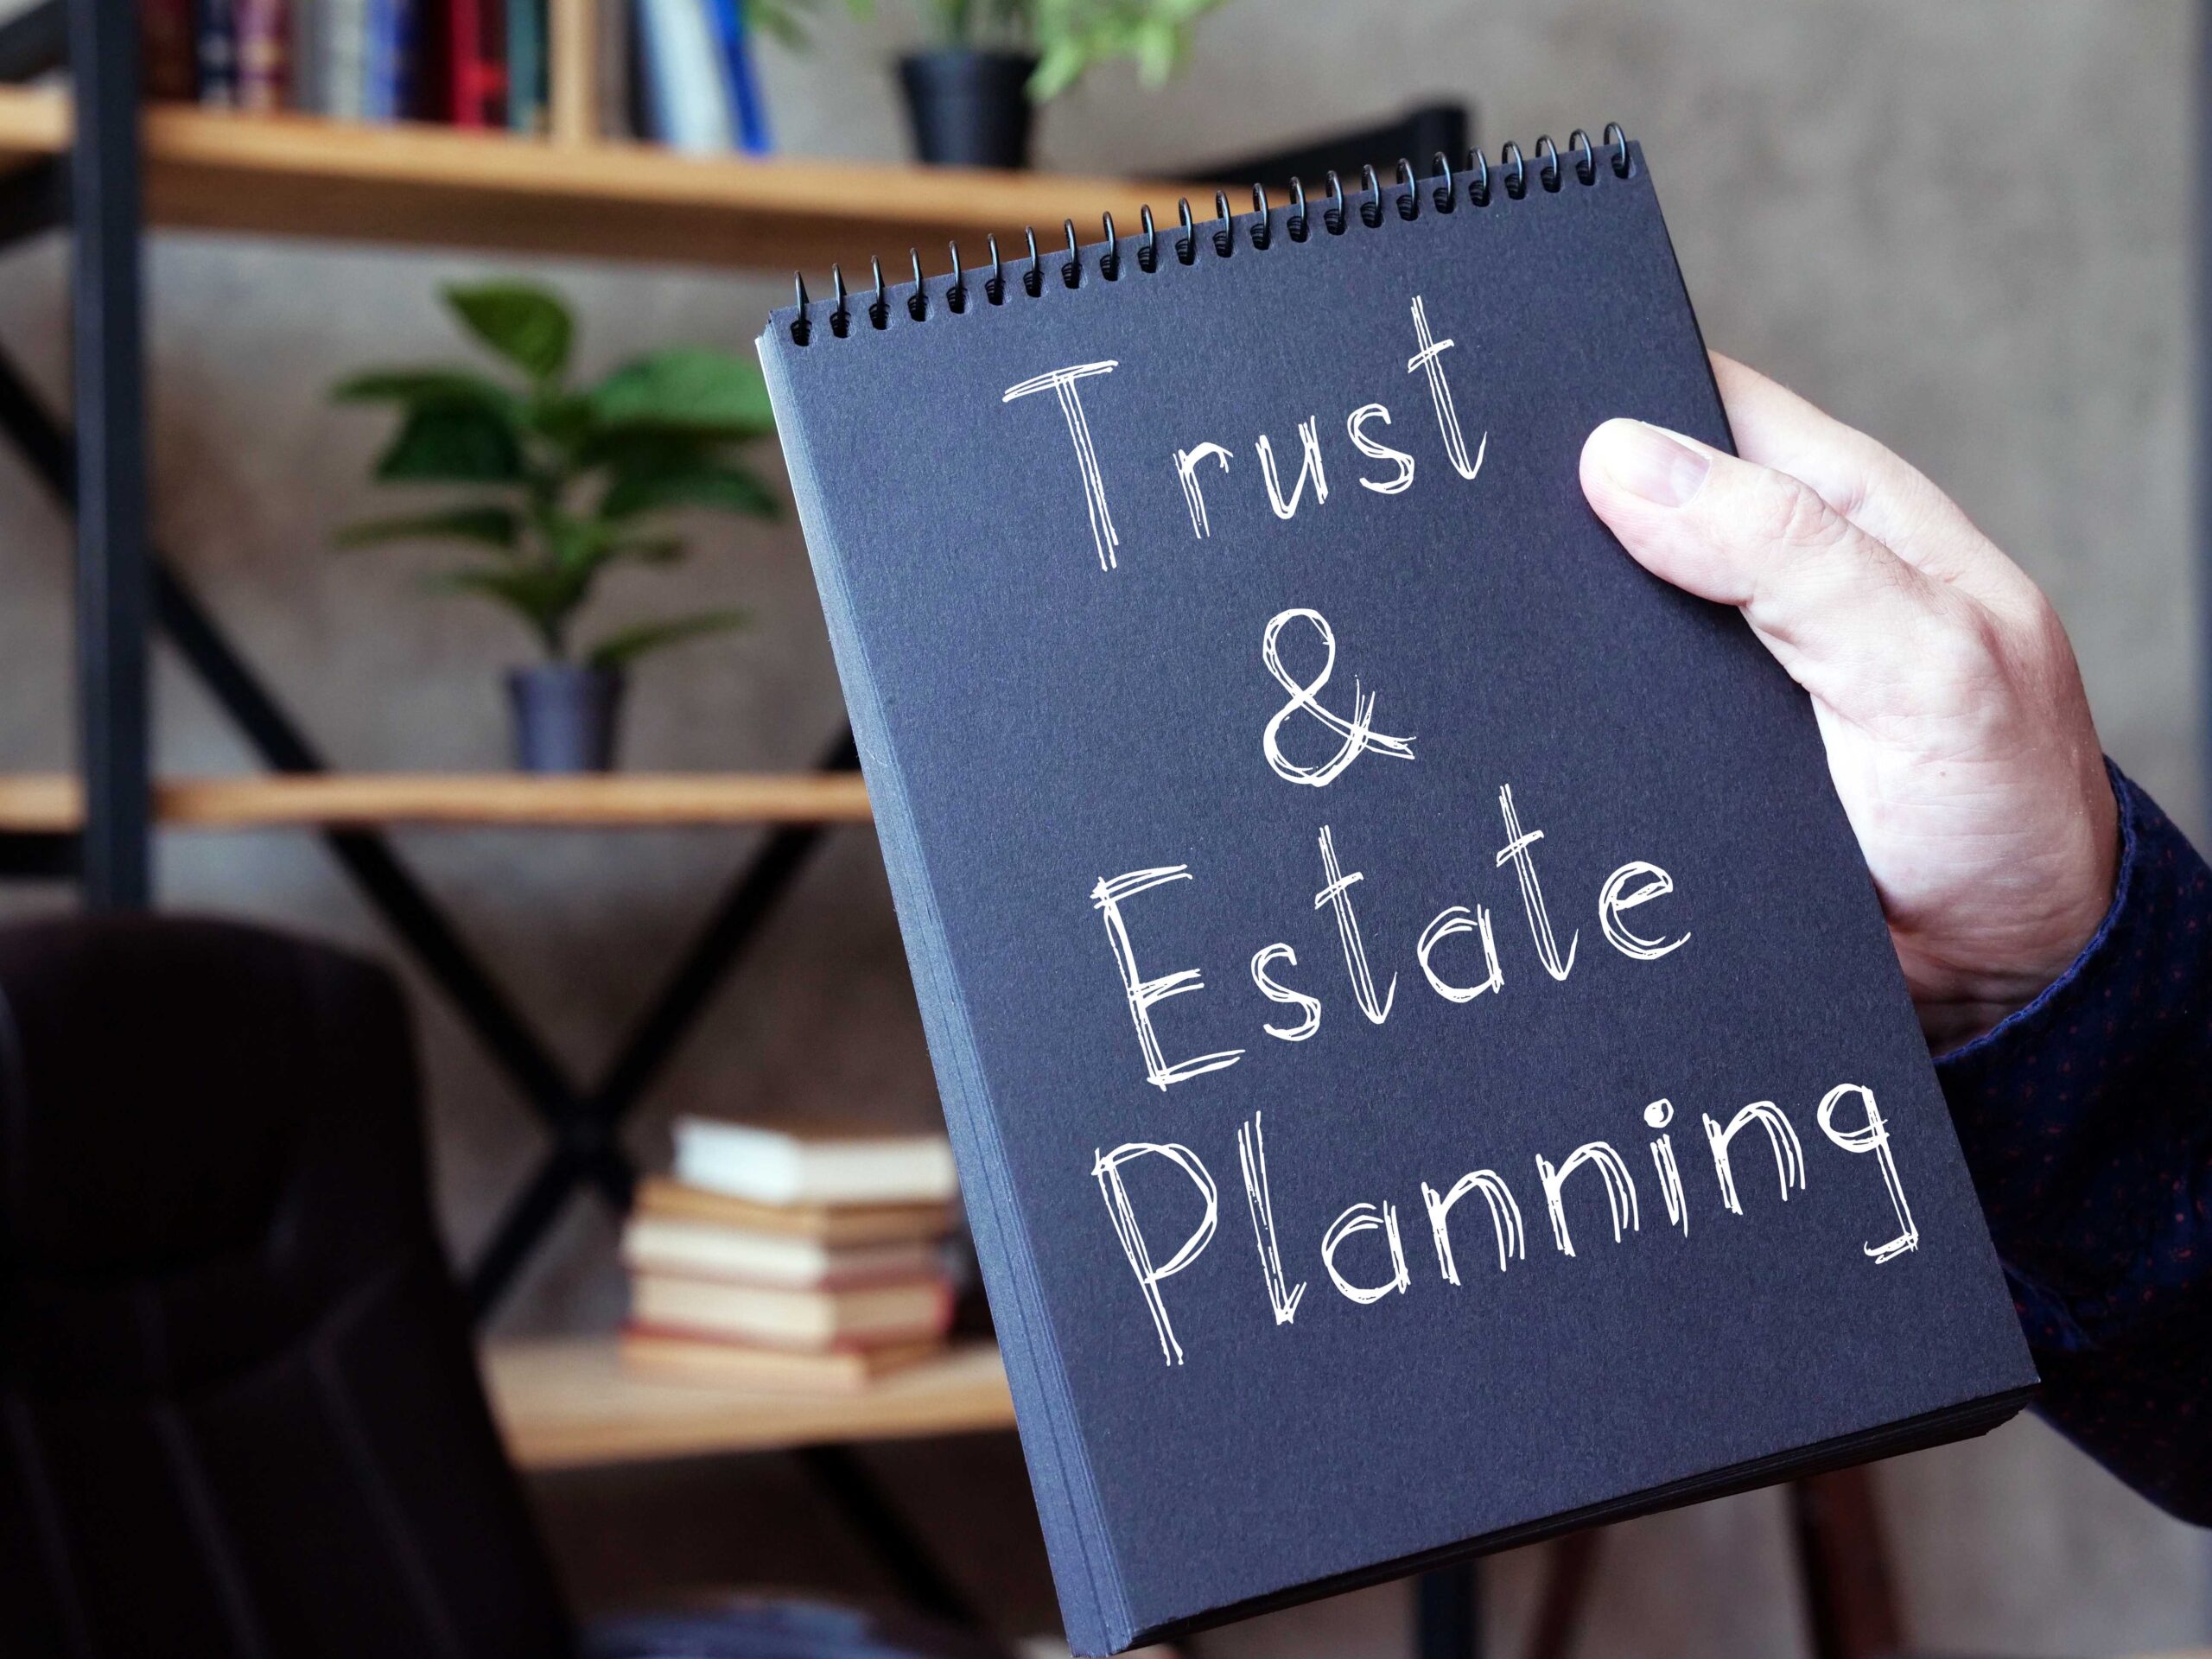 hand holding 'Trust & Estate Planning' book - FCA's unusual warning on trusts